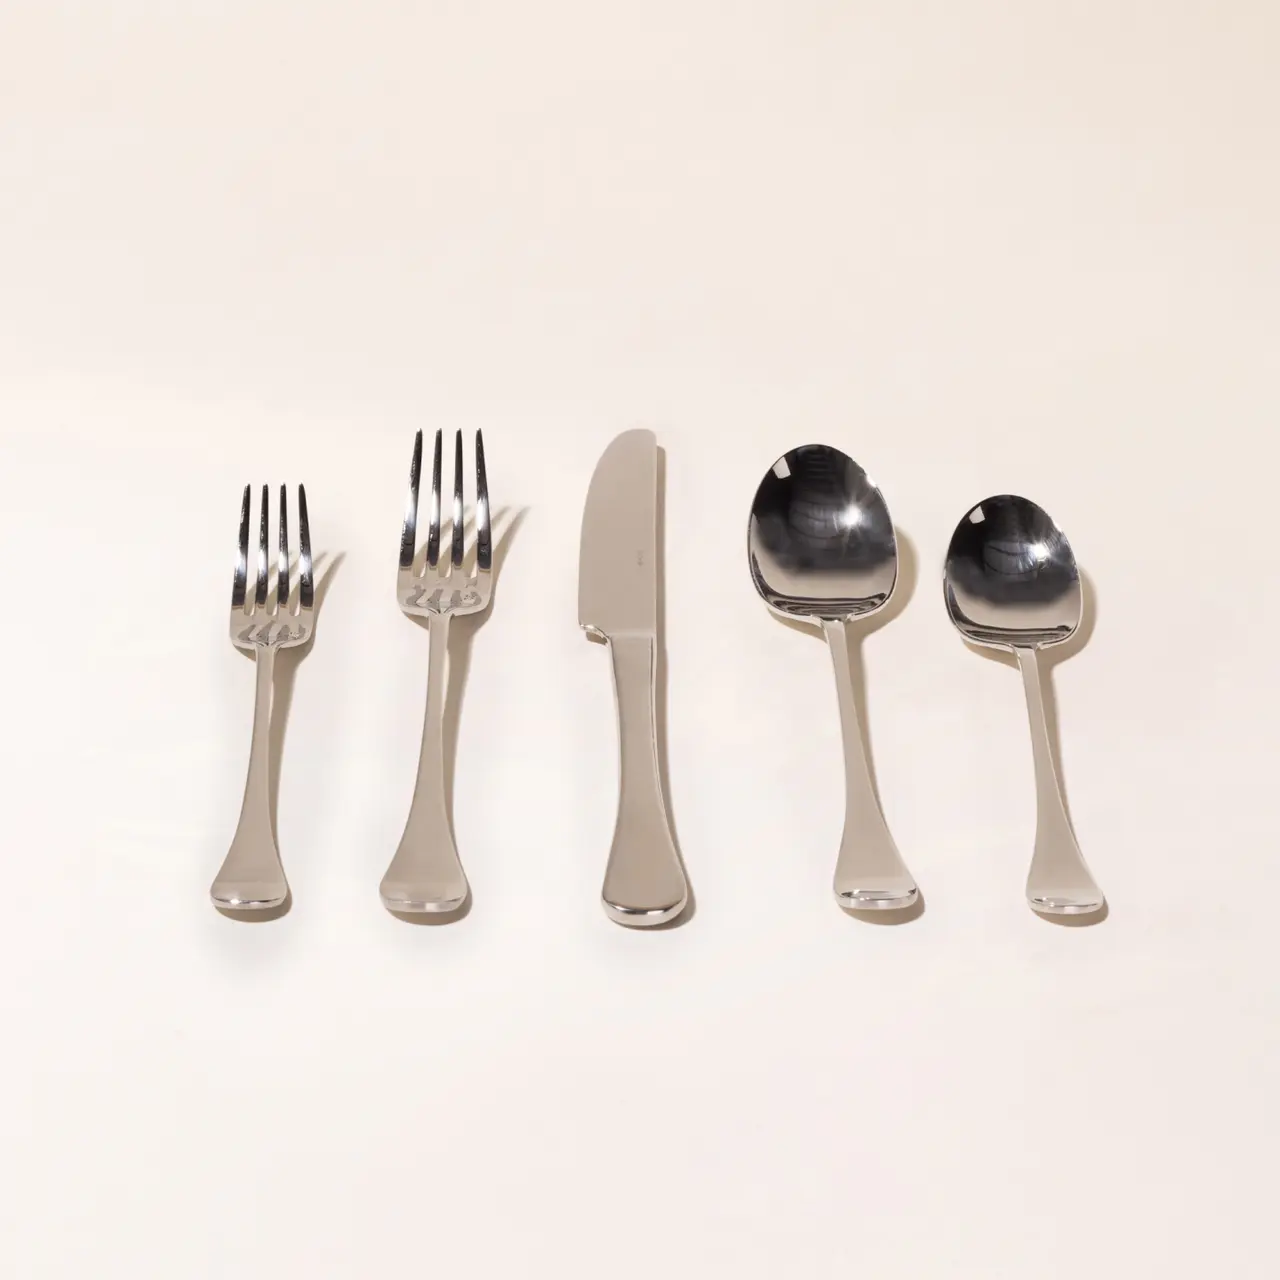 Five pieces of silverware, consisting of forks, a knife, and spoons, are neatly arranged on a light background.